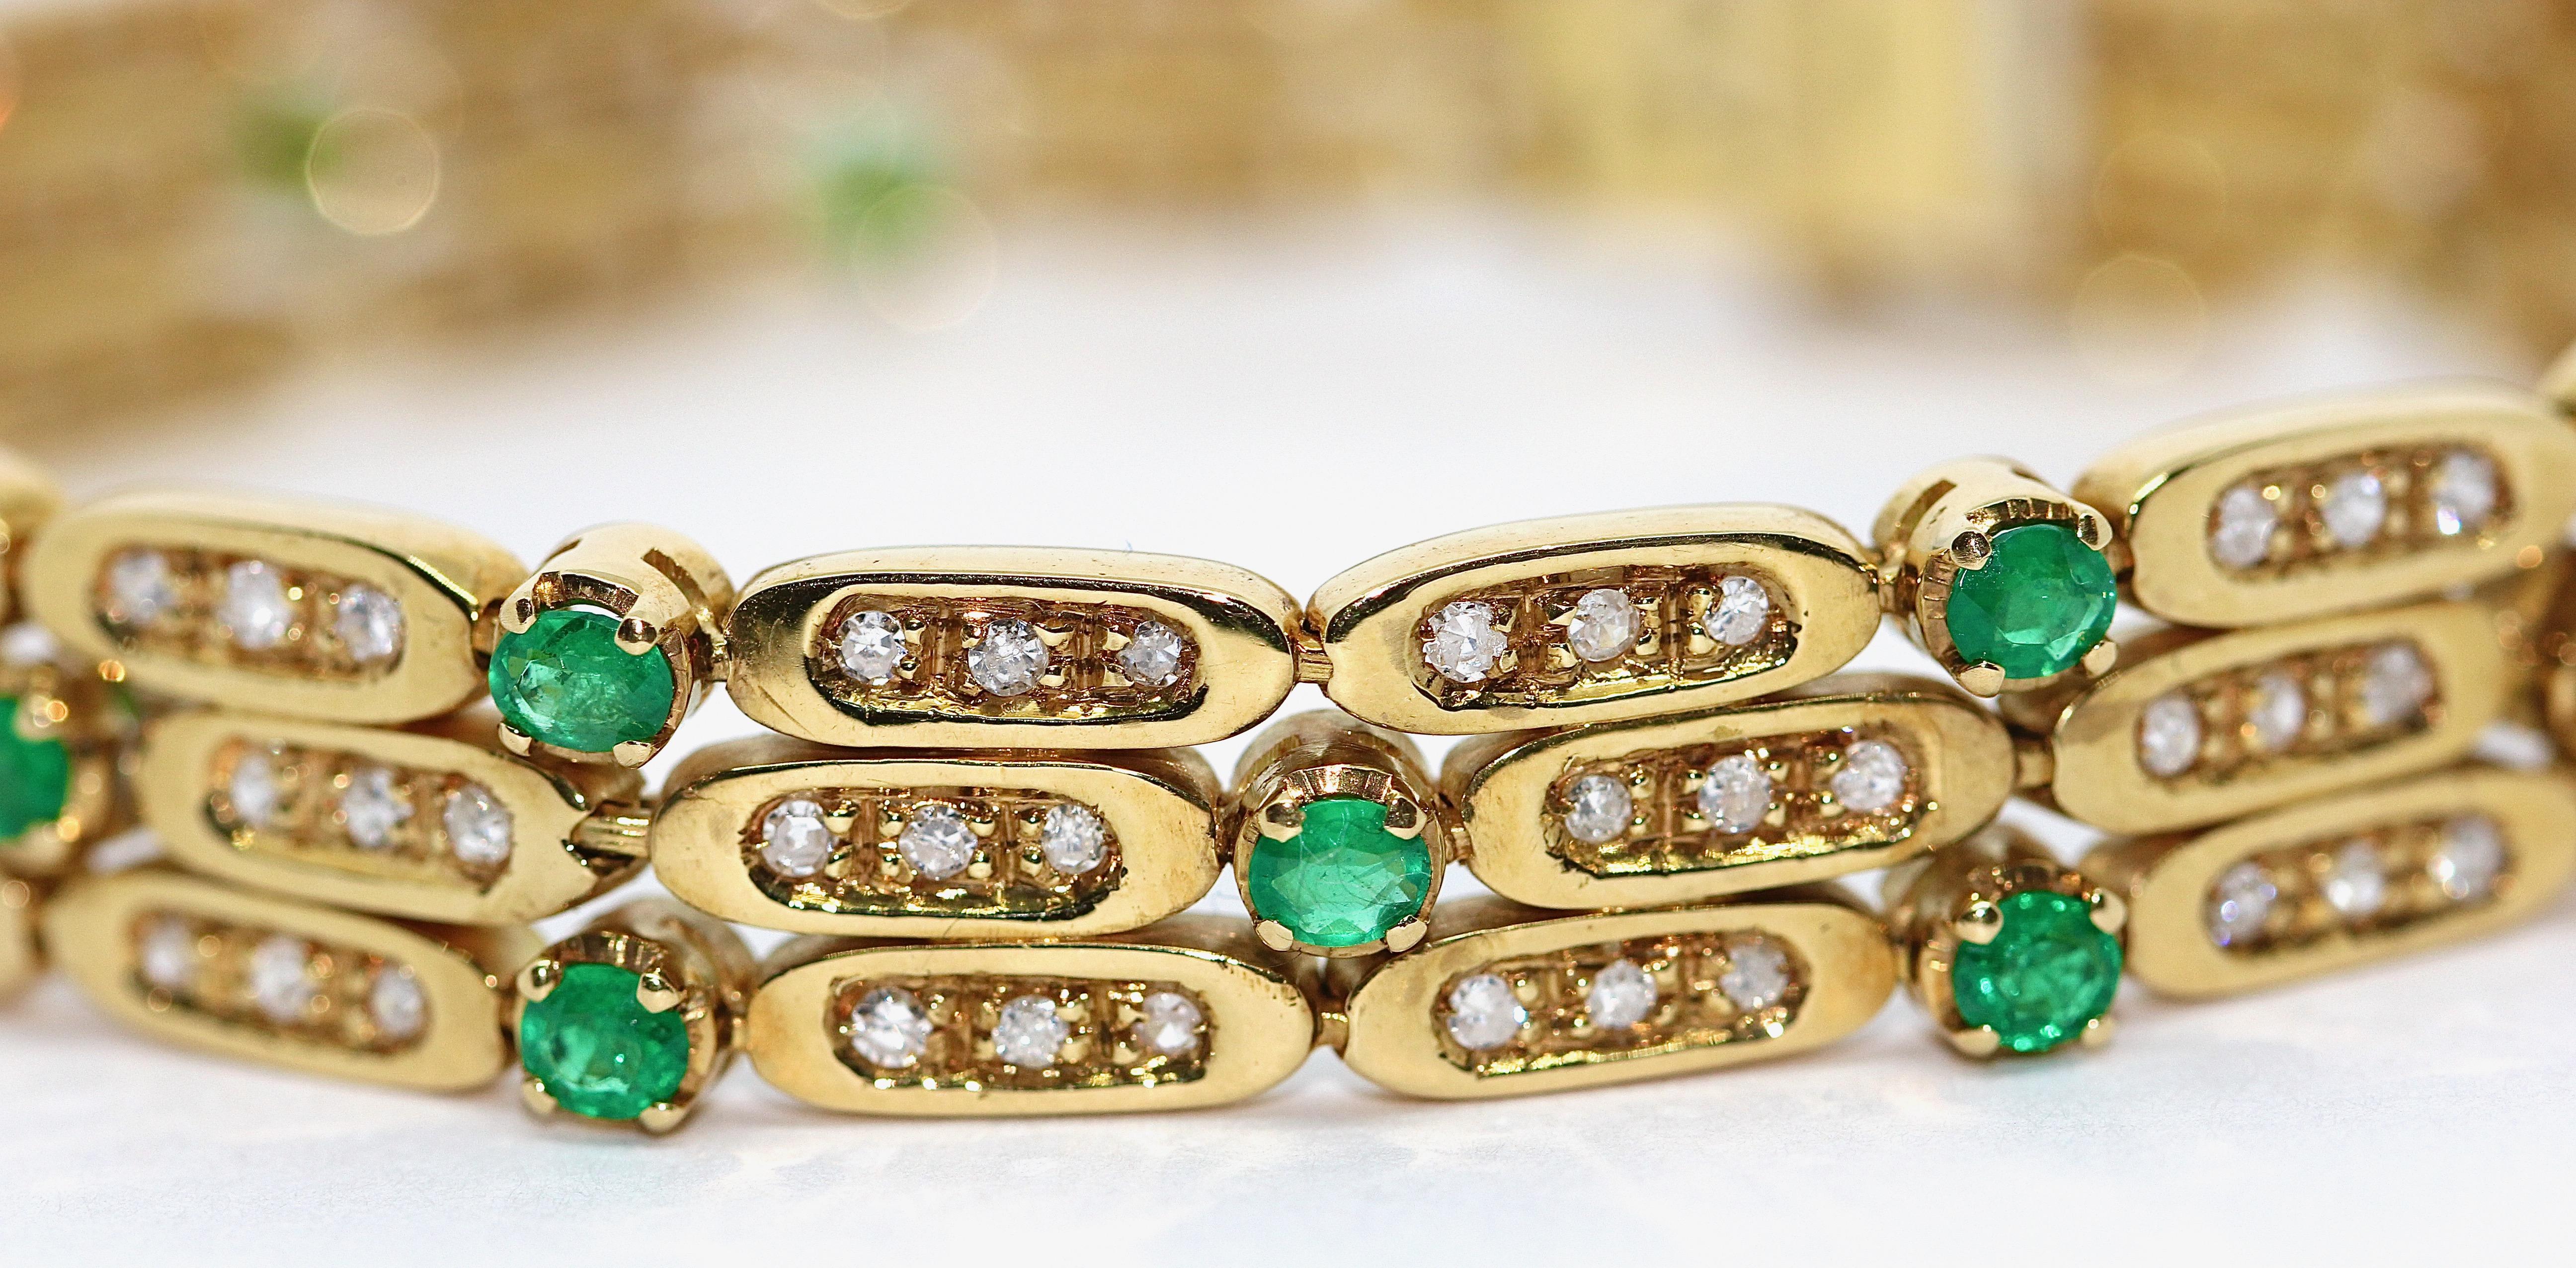 Ladies Gold Bracelet set with Diamonds and Emeralds.

18 Karat yellow gold. Finest goldsmith work.

Diamonds (Wesselton, I1) total weight 1.15 ct.
23 emeralds, total weight approx. 1.78 ct.

Including certificate of authenticity.